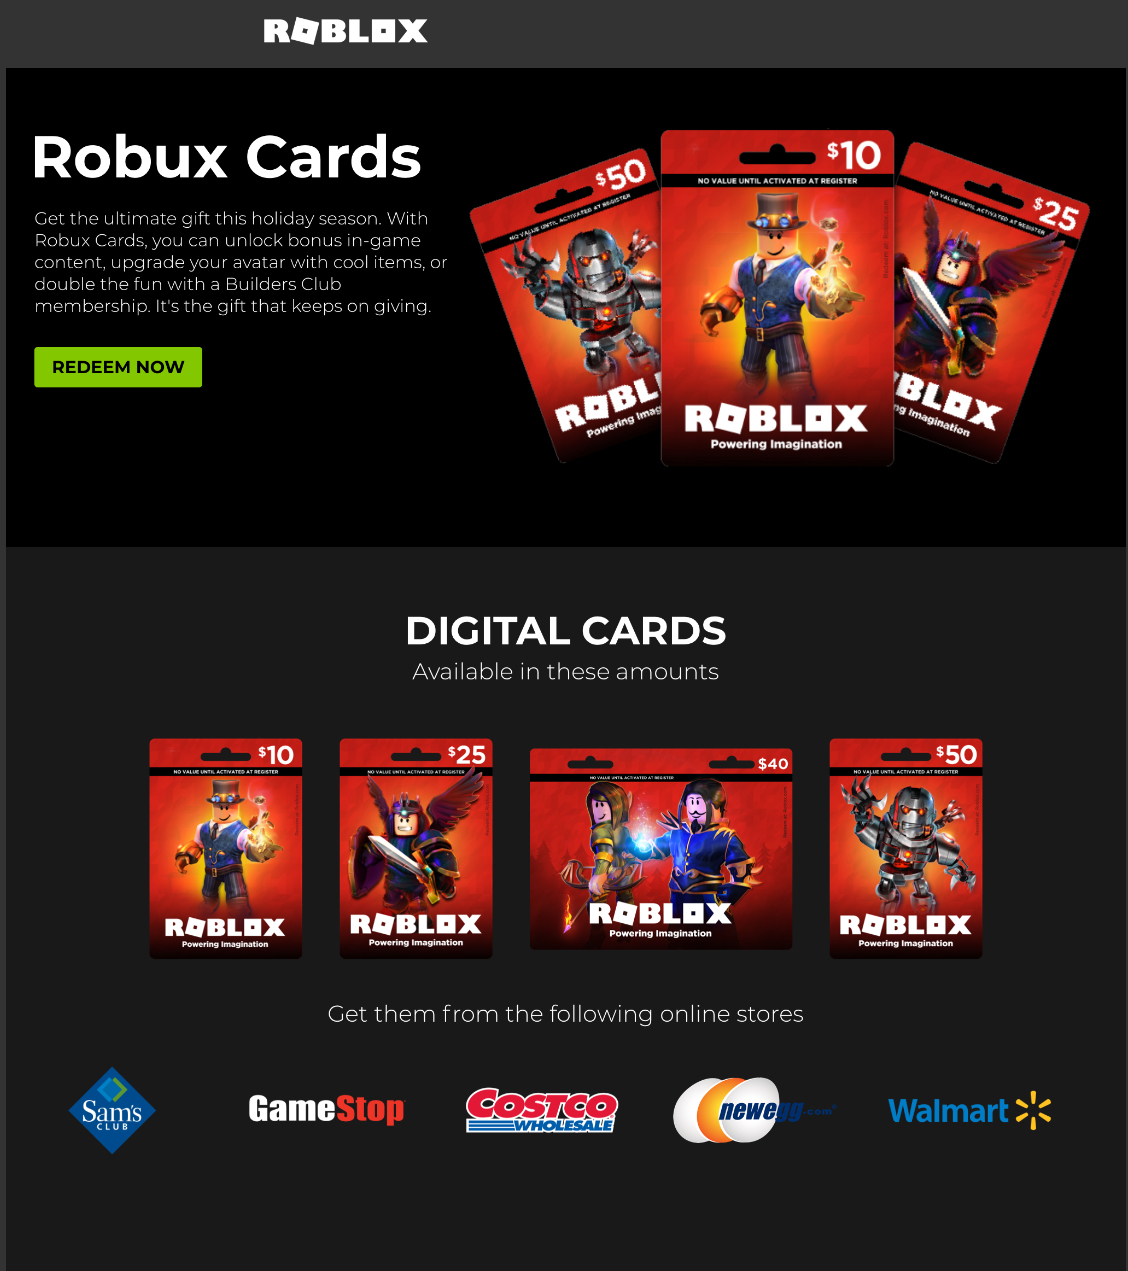 How to Redeem Roblox Gift Card for Premium Robux and Membership